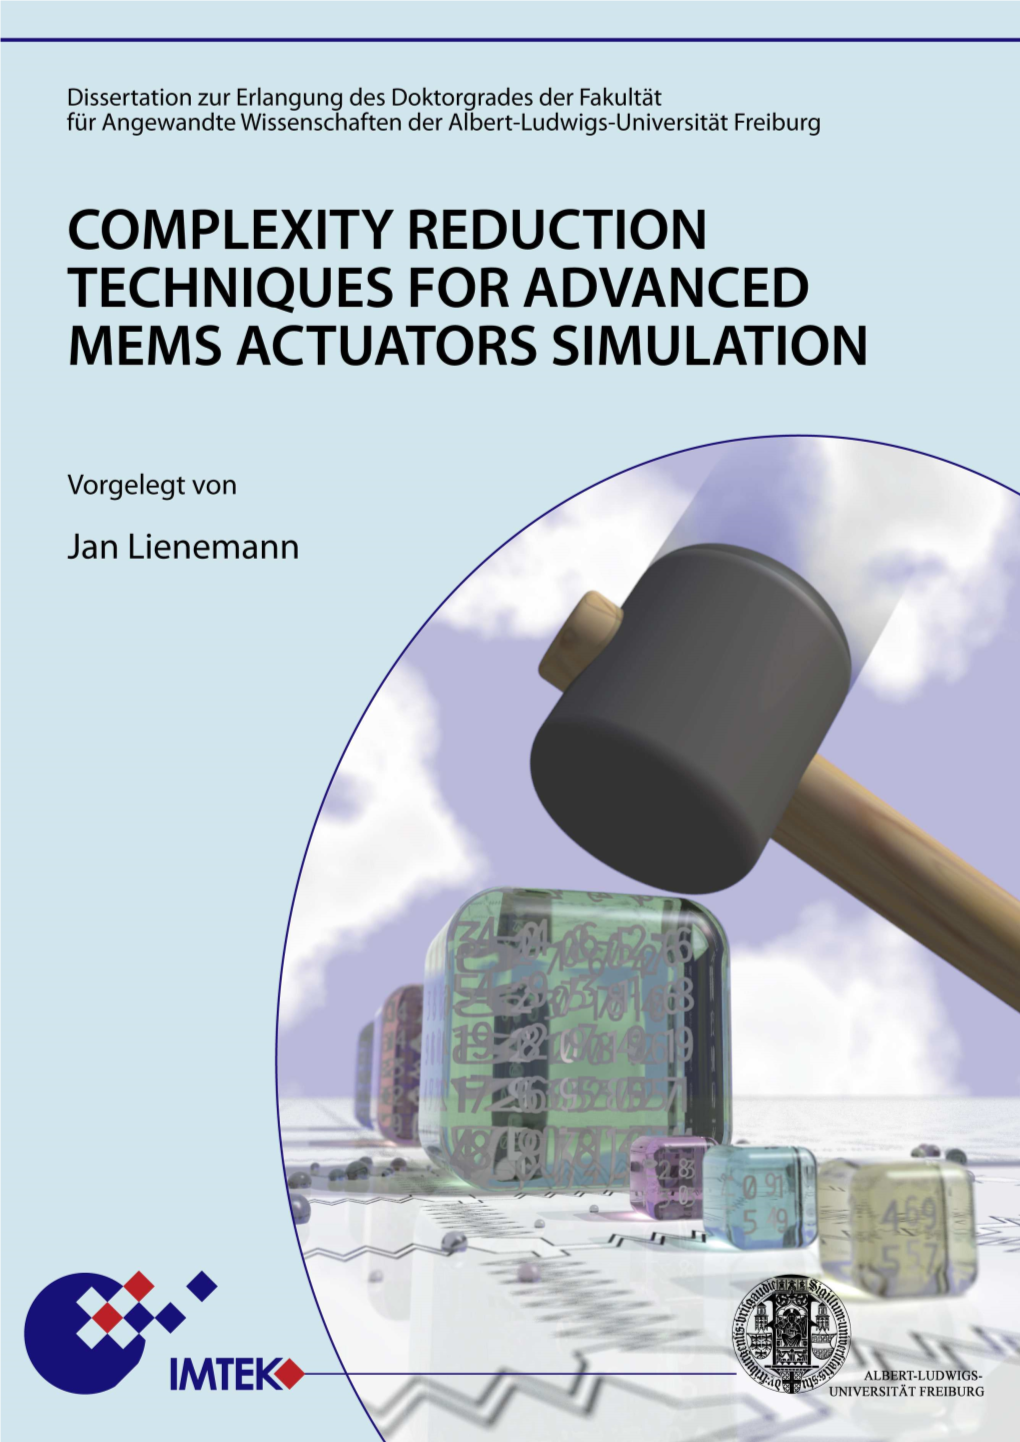 COMPLEXITY REDUCTION TECHNIQUES for ADVANCED MEMS ACTUATORS SIMULATION Iv COMPLEXITY REDUCTION TECHNIQUES for ADVANCED MEMS ACTUATORS SIMULATION